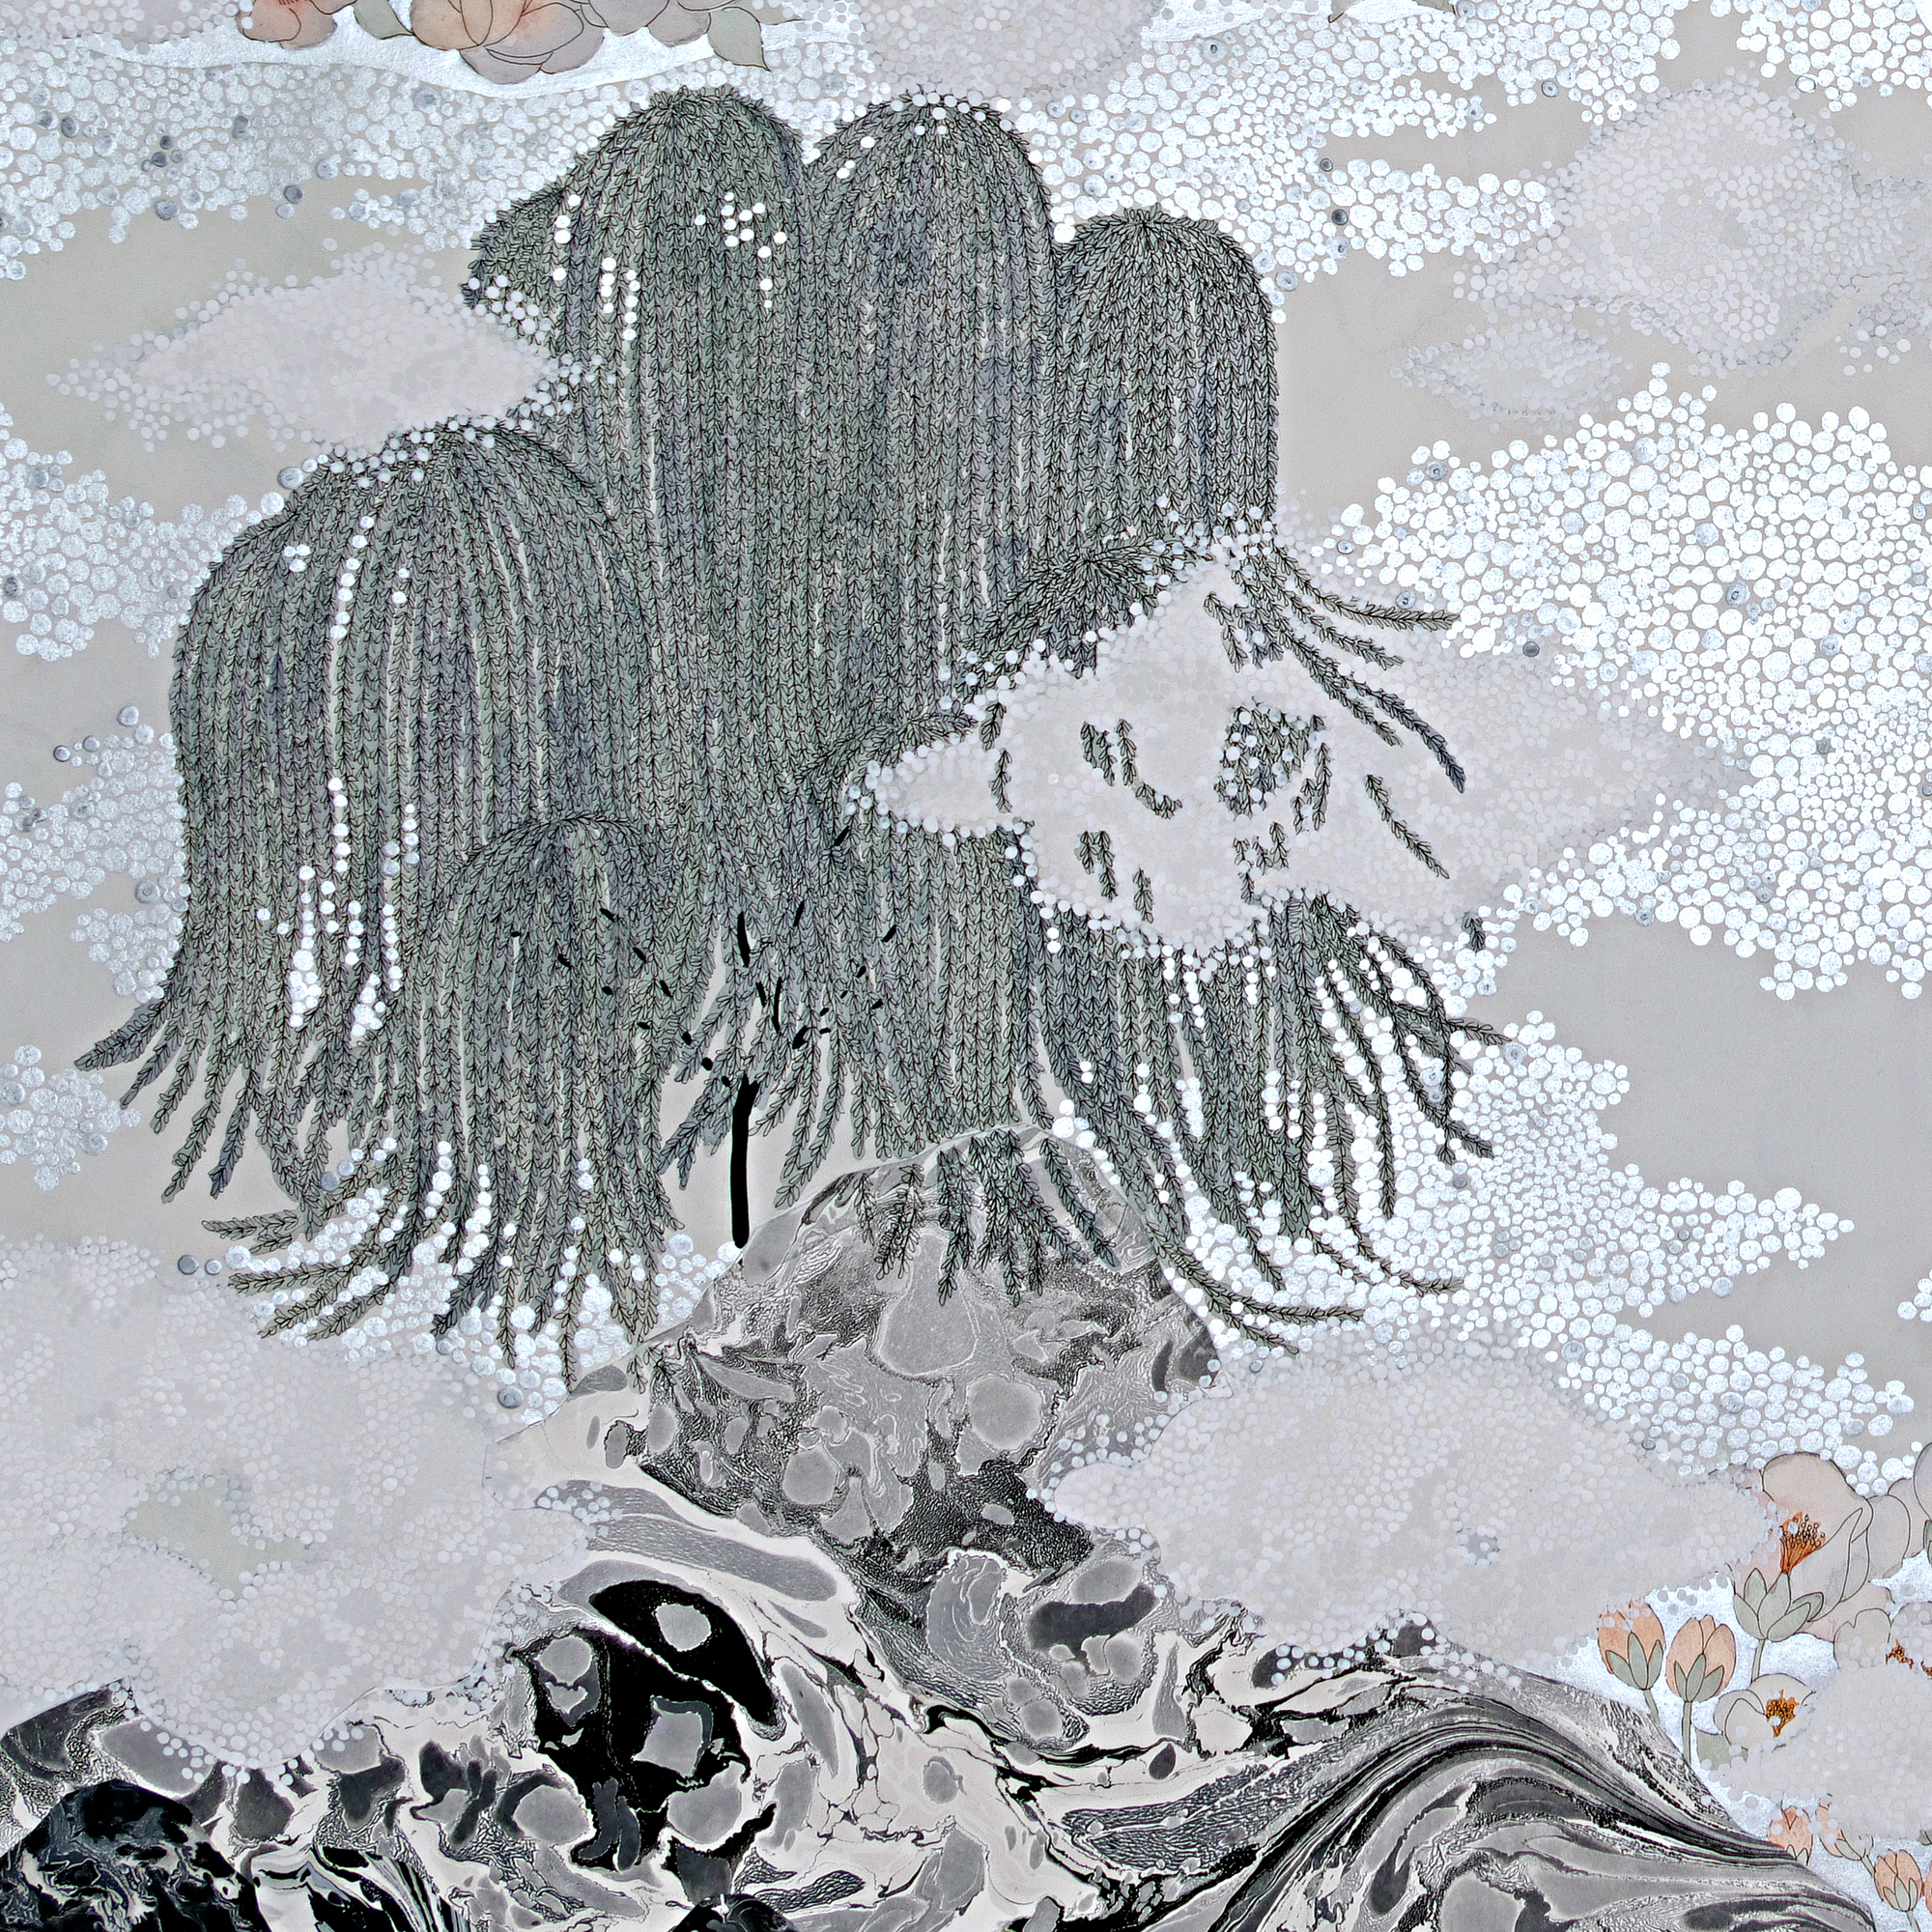 the fog, "rolling in" (detail)